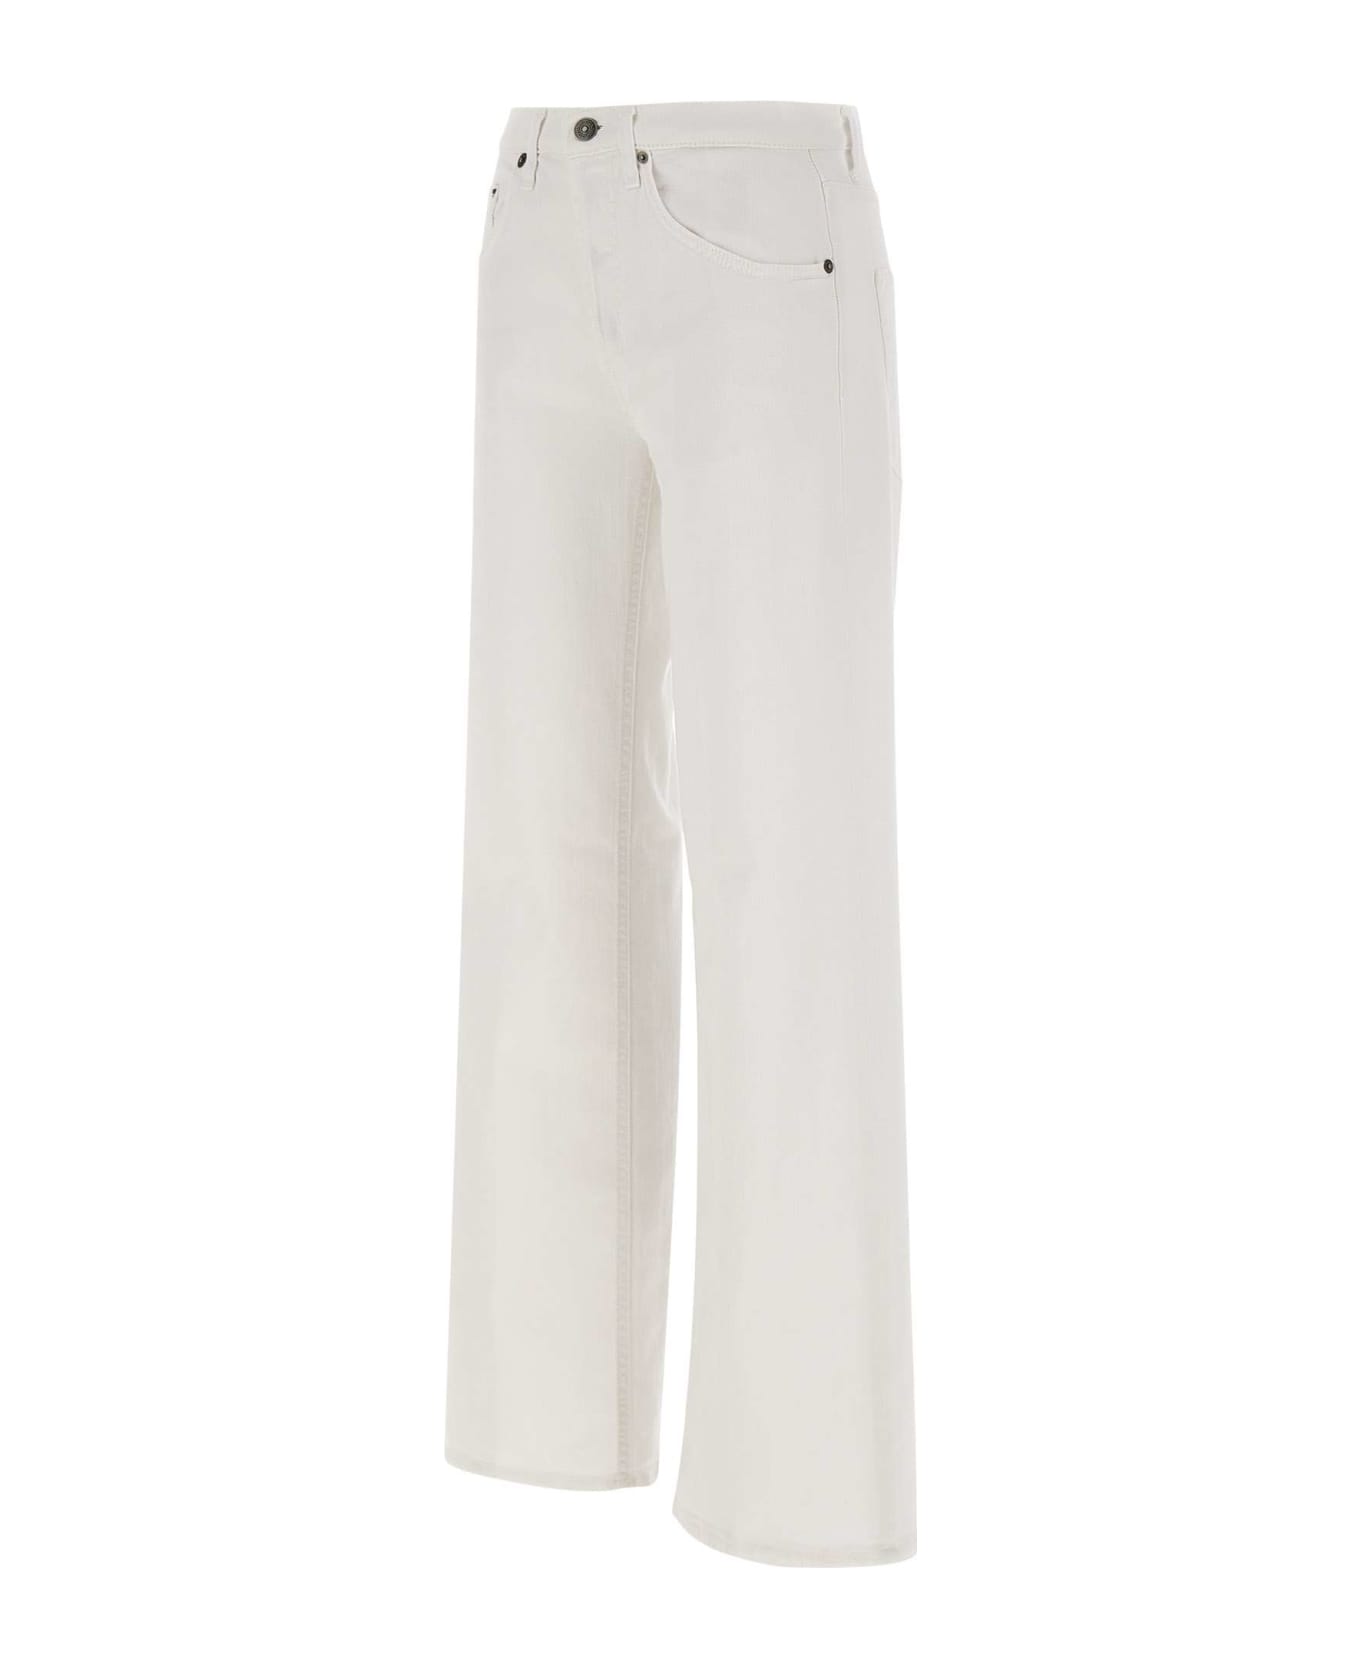 Dondup 'jacklyn' Cotton Jeans - WHITE デニム